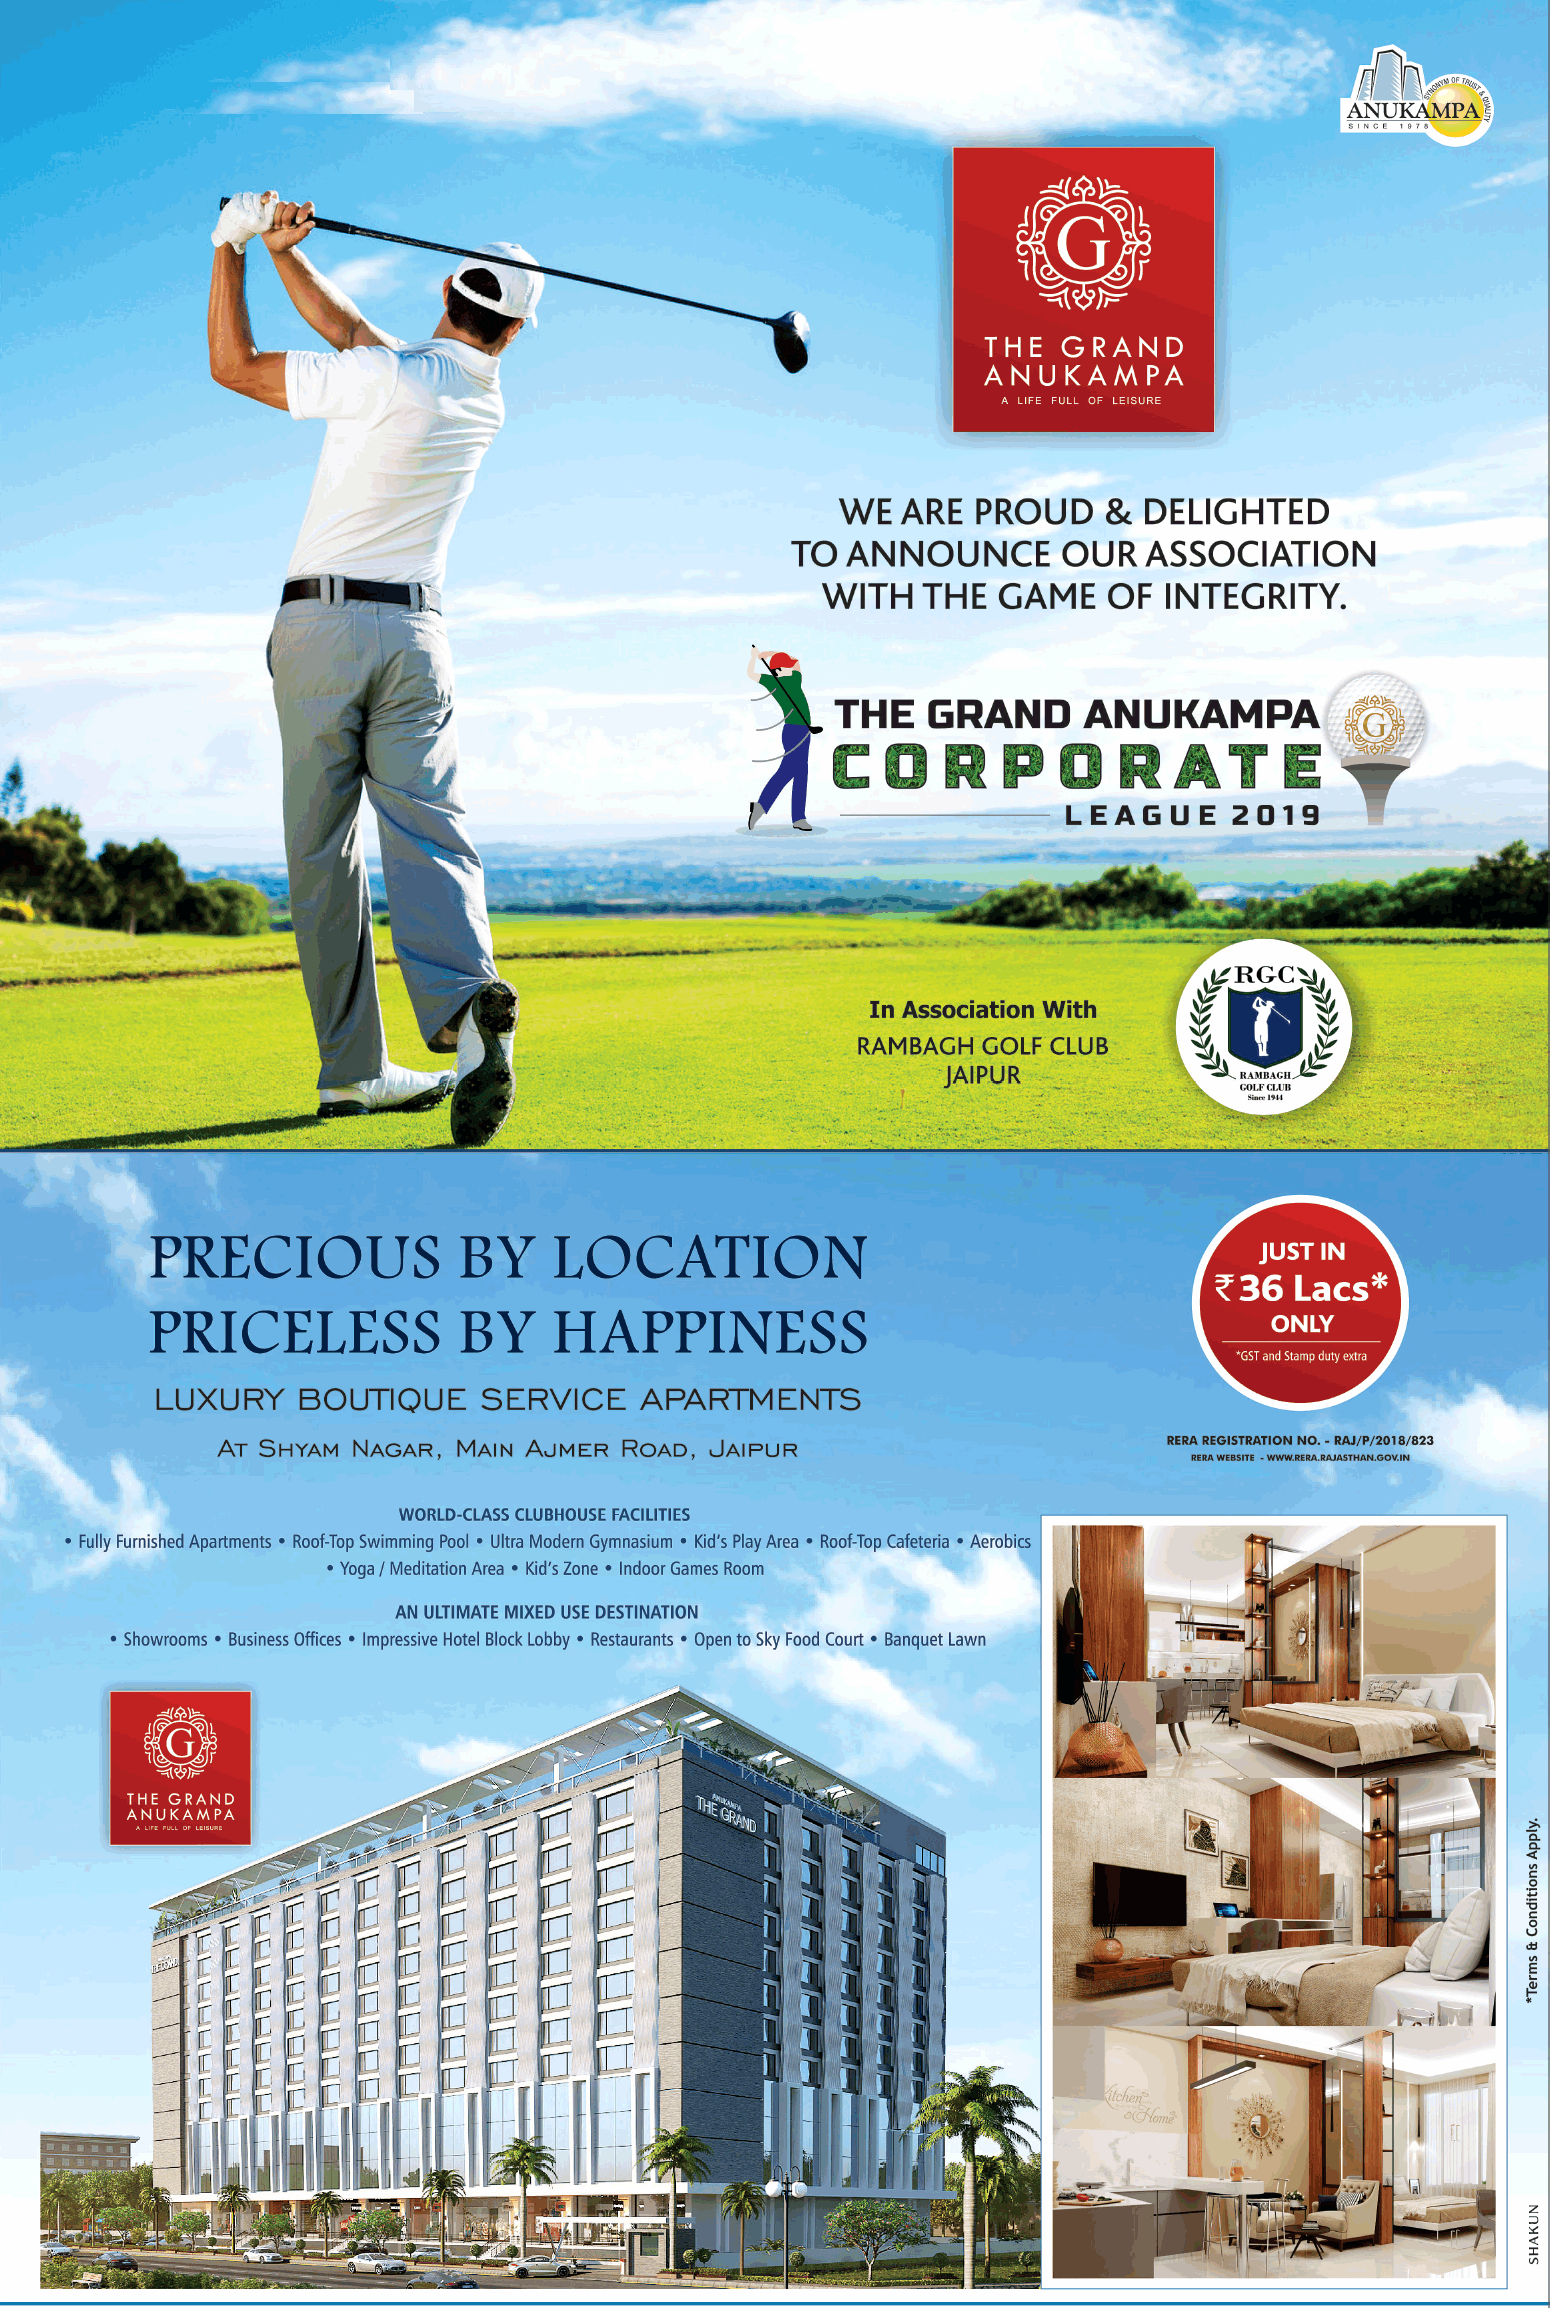 Avail luxury boutique service apartments just in Rs. 36 lakhs at The Grand Anukampa in Jaipur Update